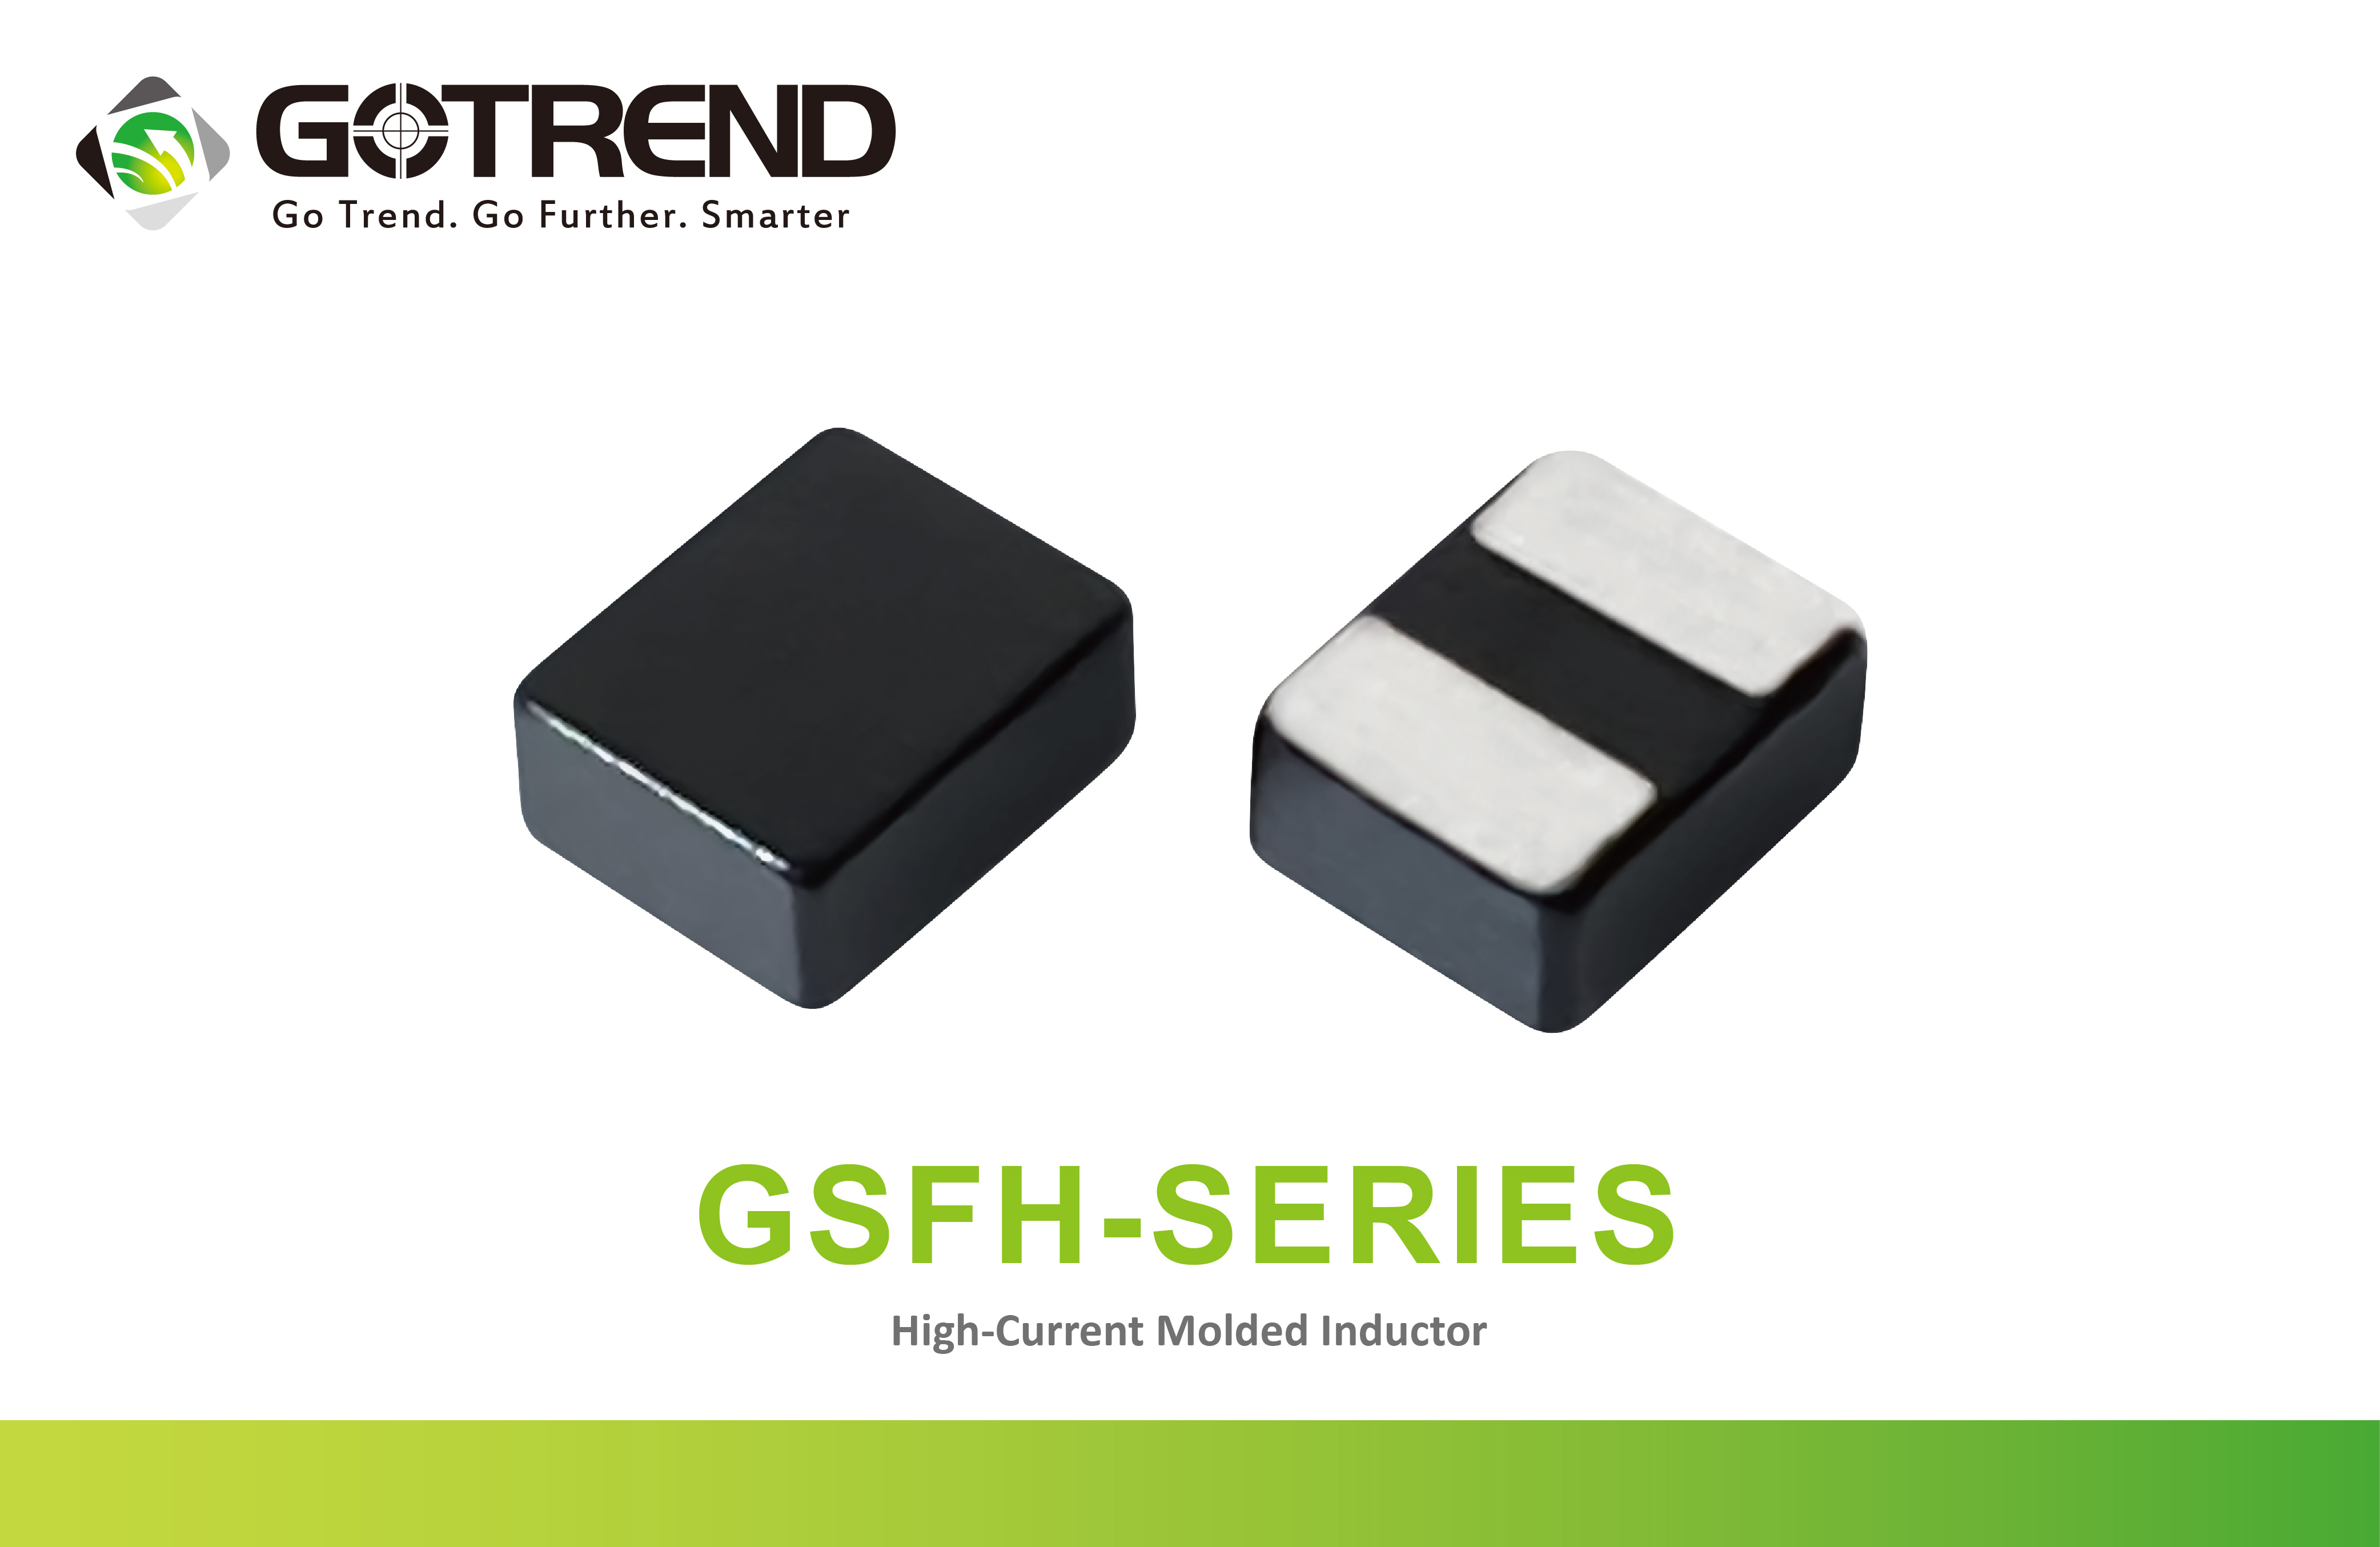 GSFH Series molded power inductors